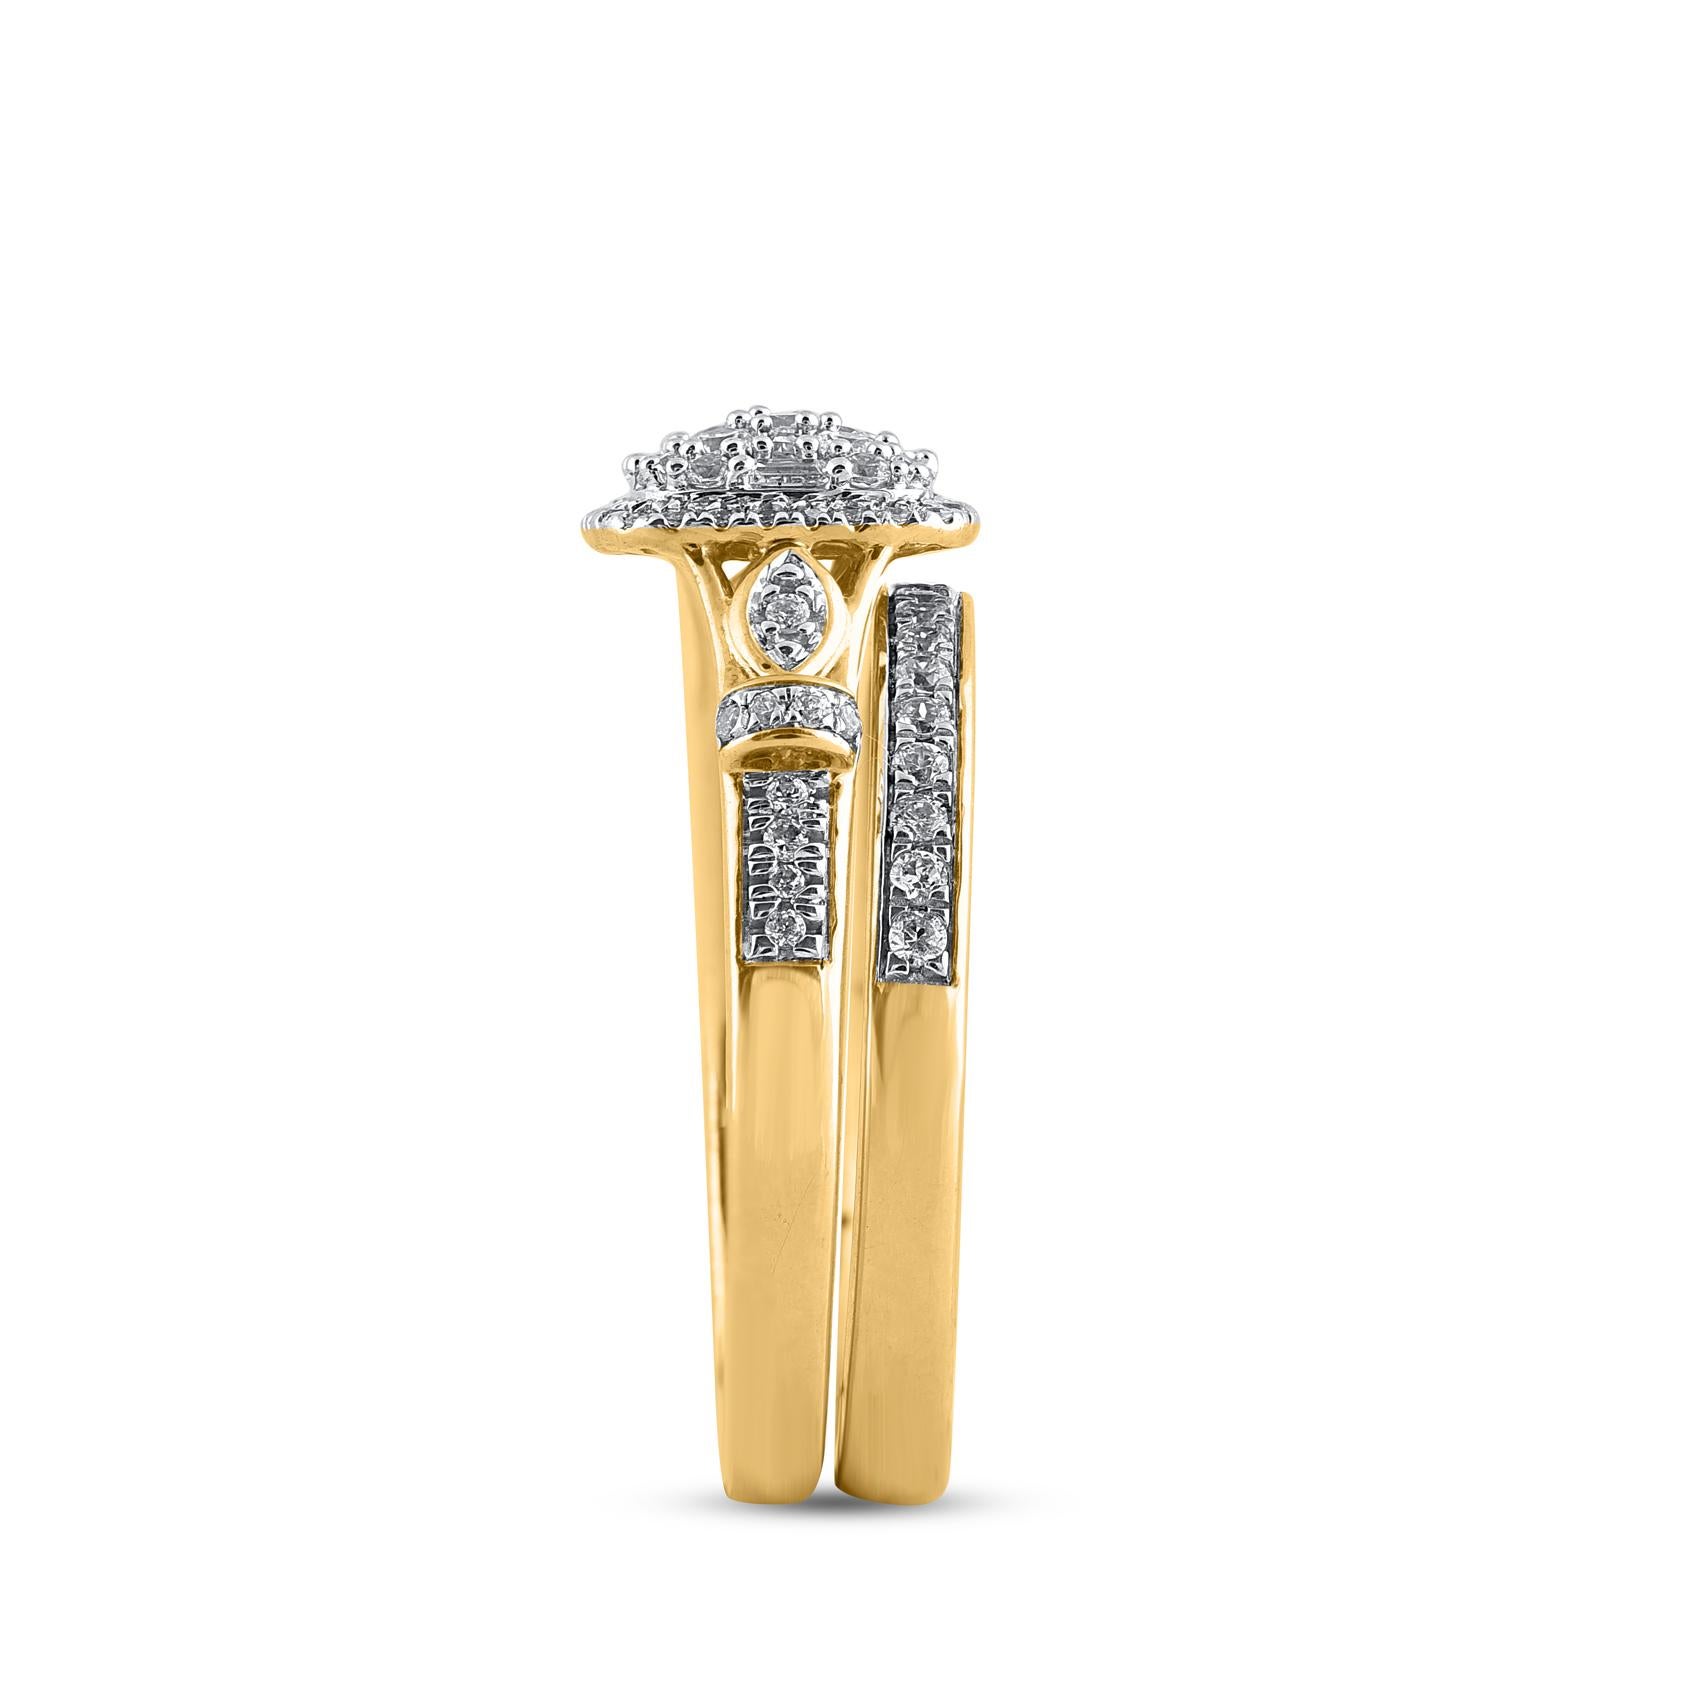 Mixed Cut TJD 0.50 Carat Round and Baguette Cut Diamond 14KT Yellow Gold Halo Wedding Ring For Sale